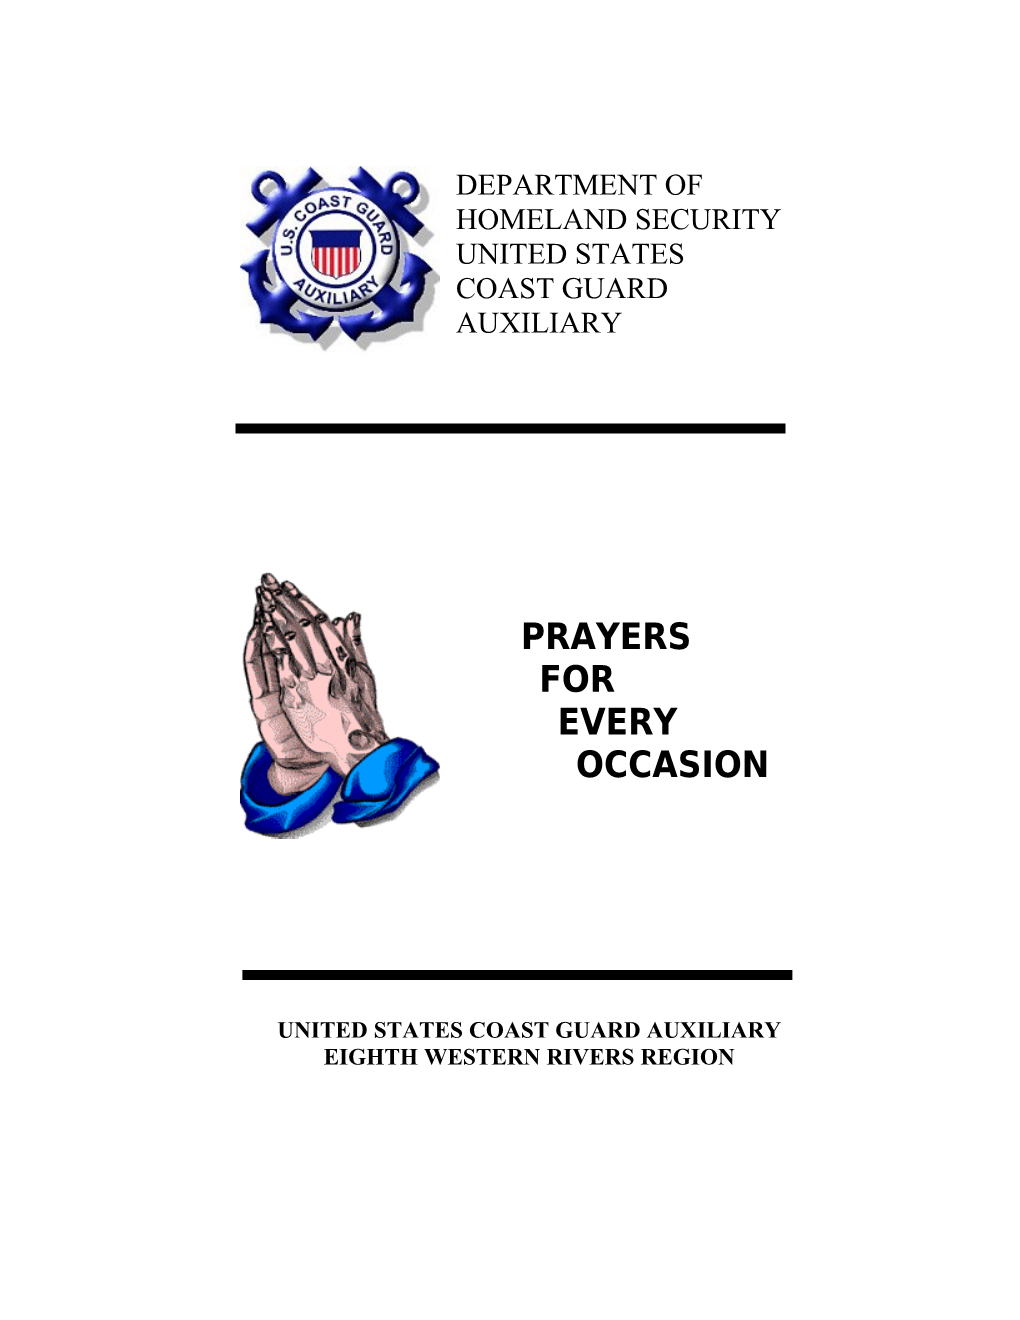 Prayers for Every Occasion